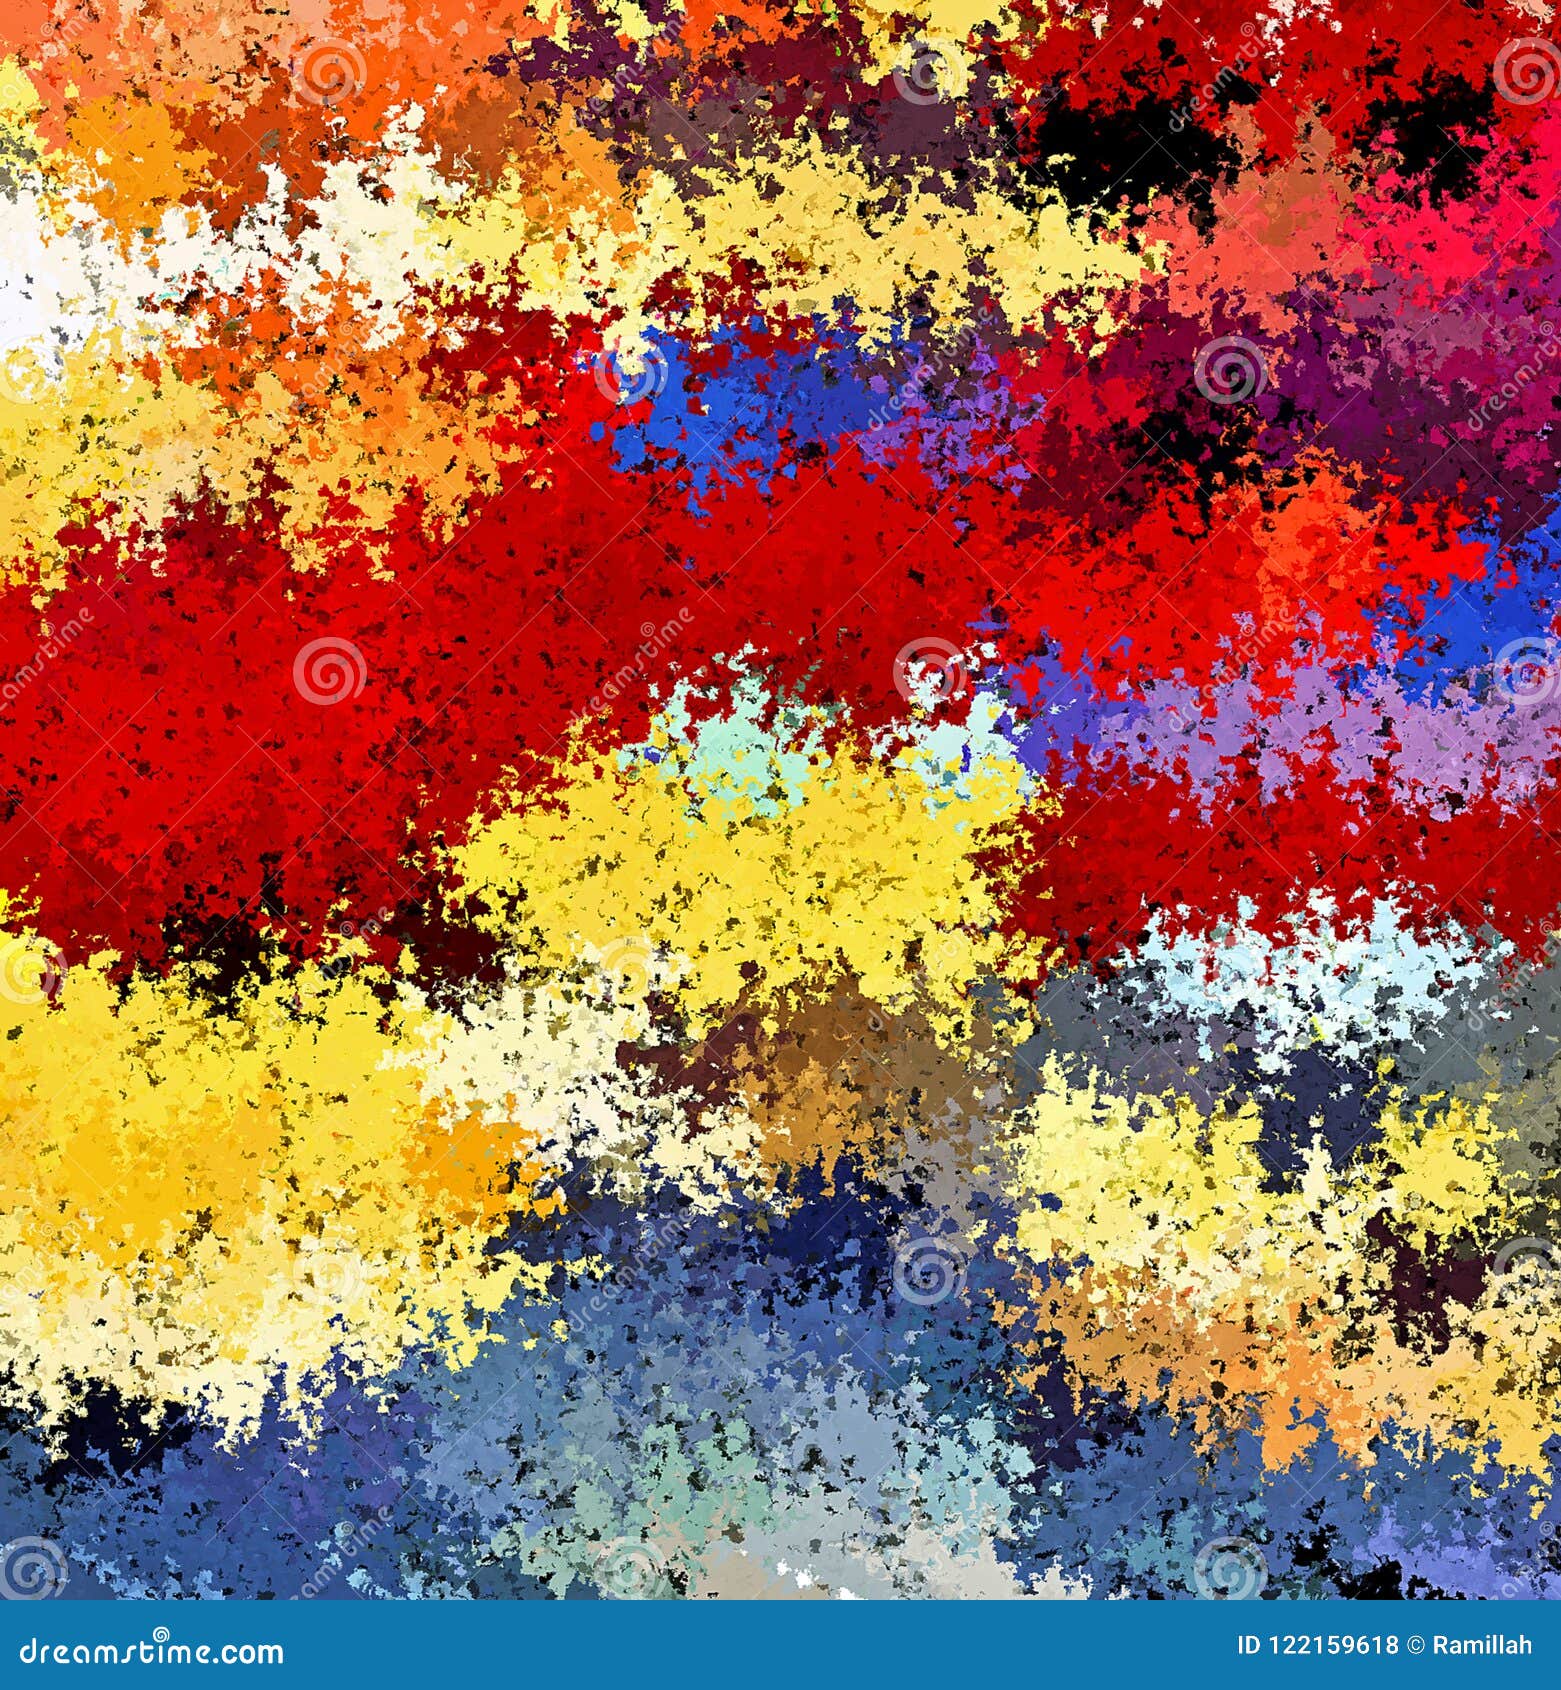 Digital Painting Chaotic Abstract Spatter Brush Paint In Vibrant Vivid